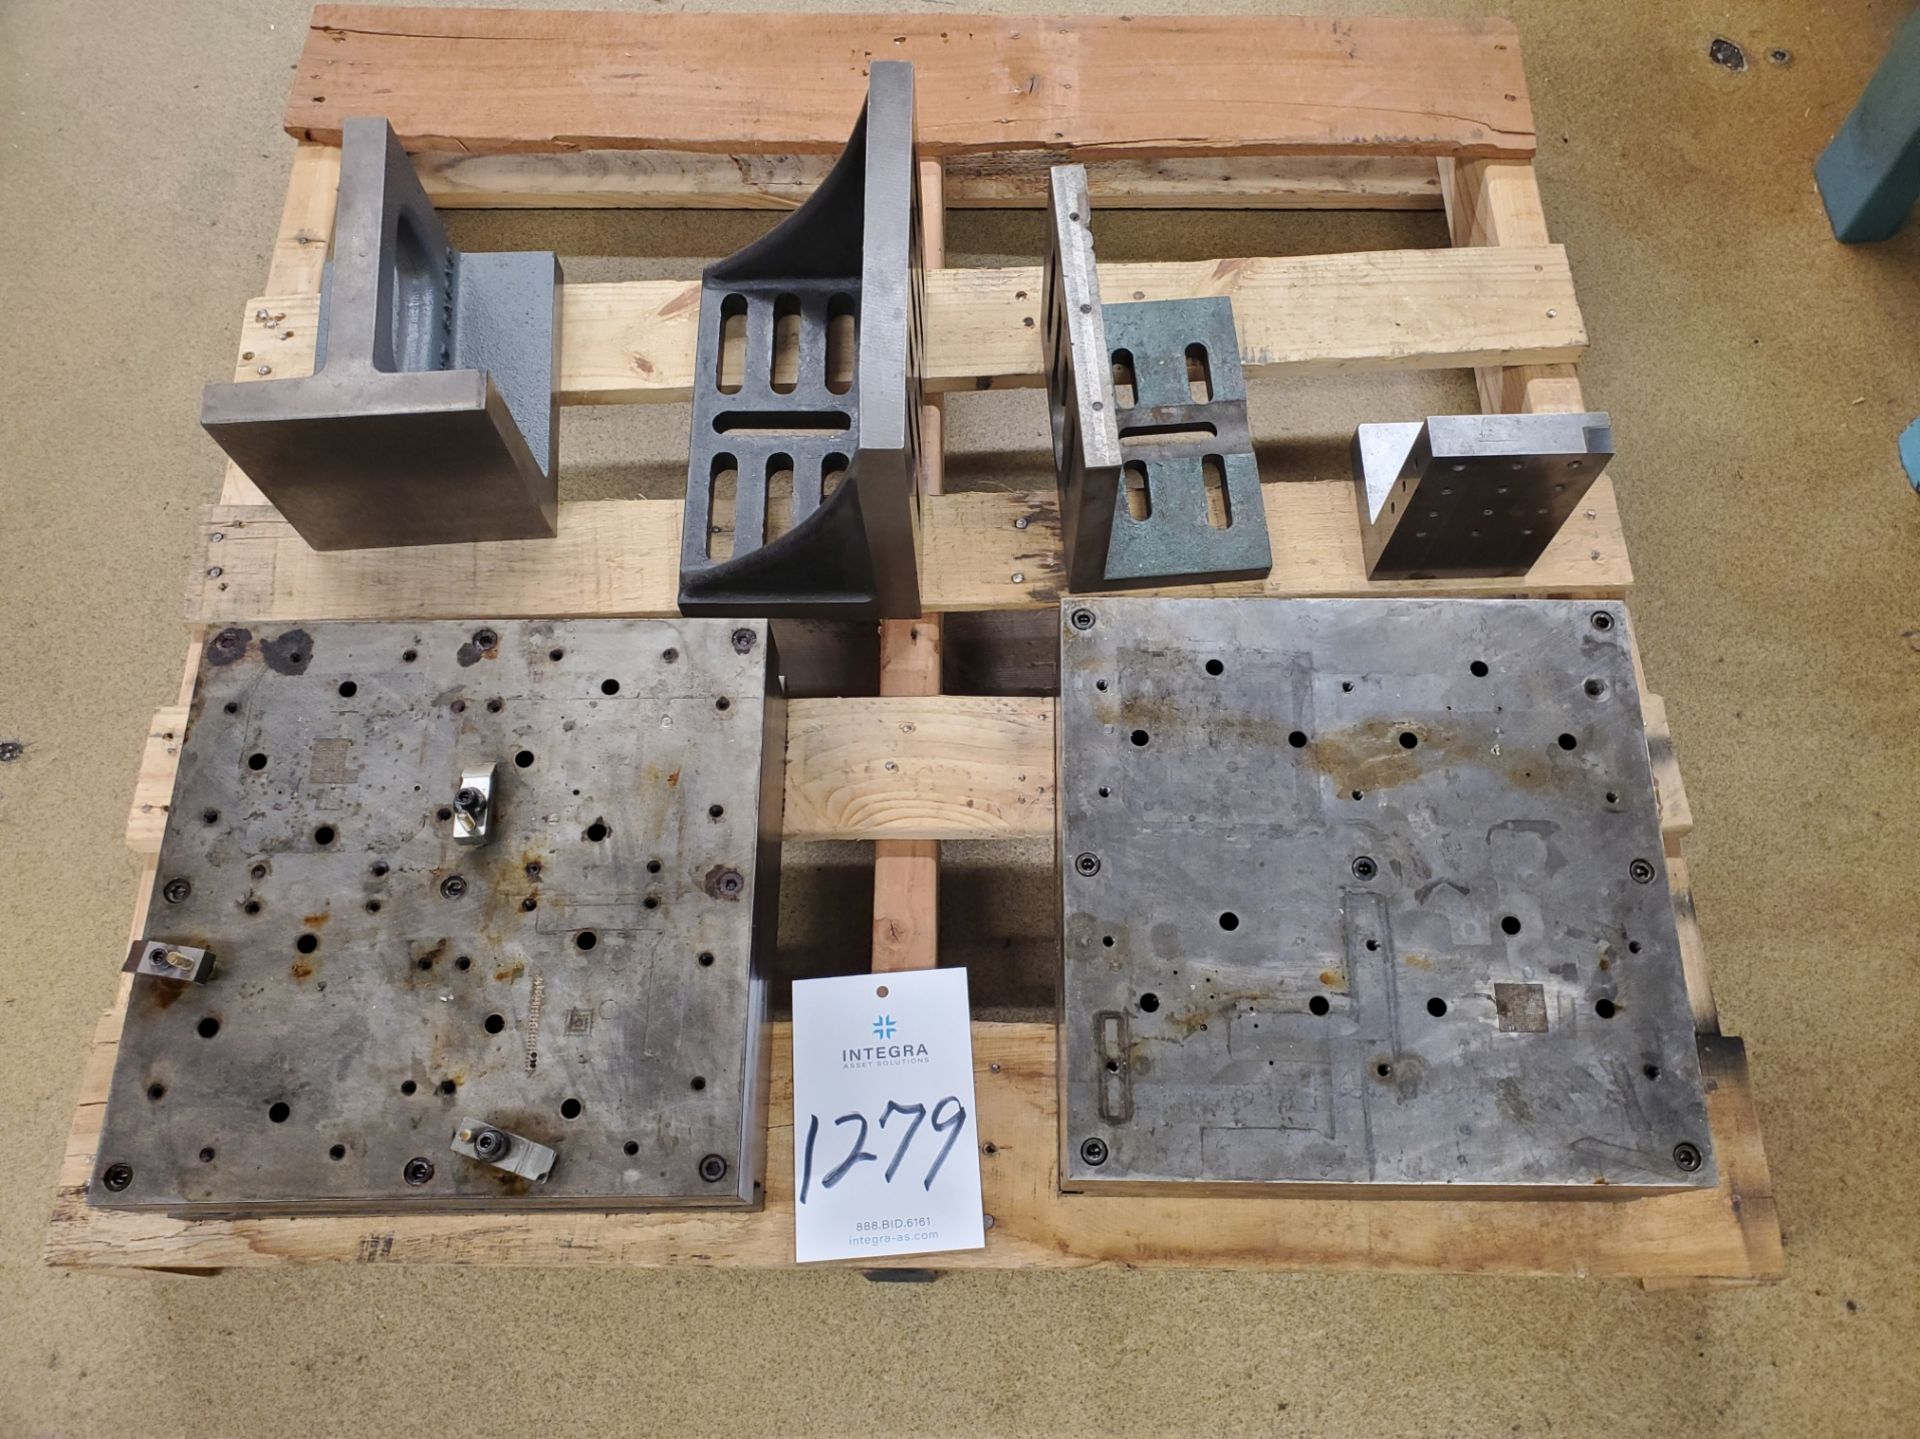 (2) 12" x 12" x 4.5" Risers w/ Lot of Assorted Angle Plates